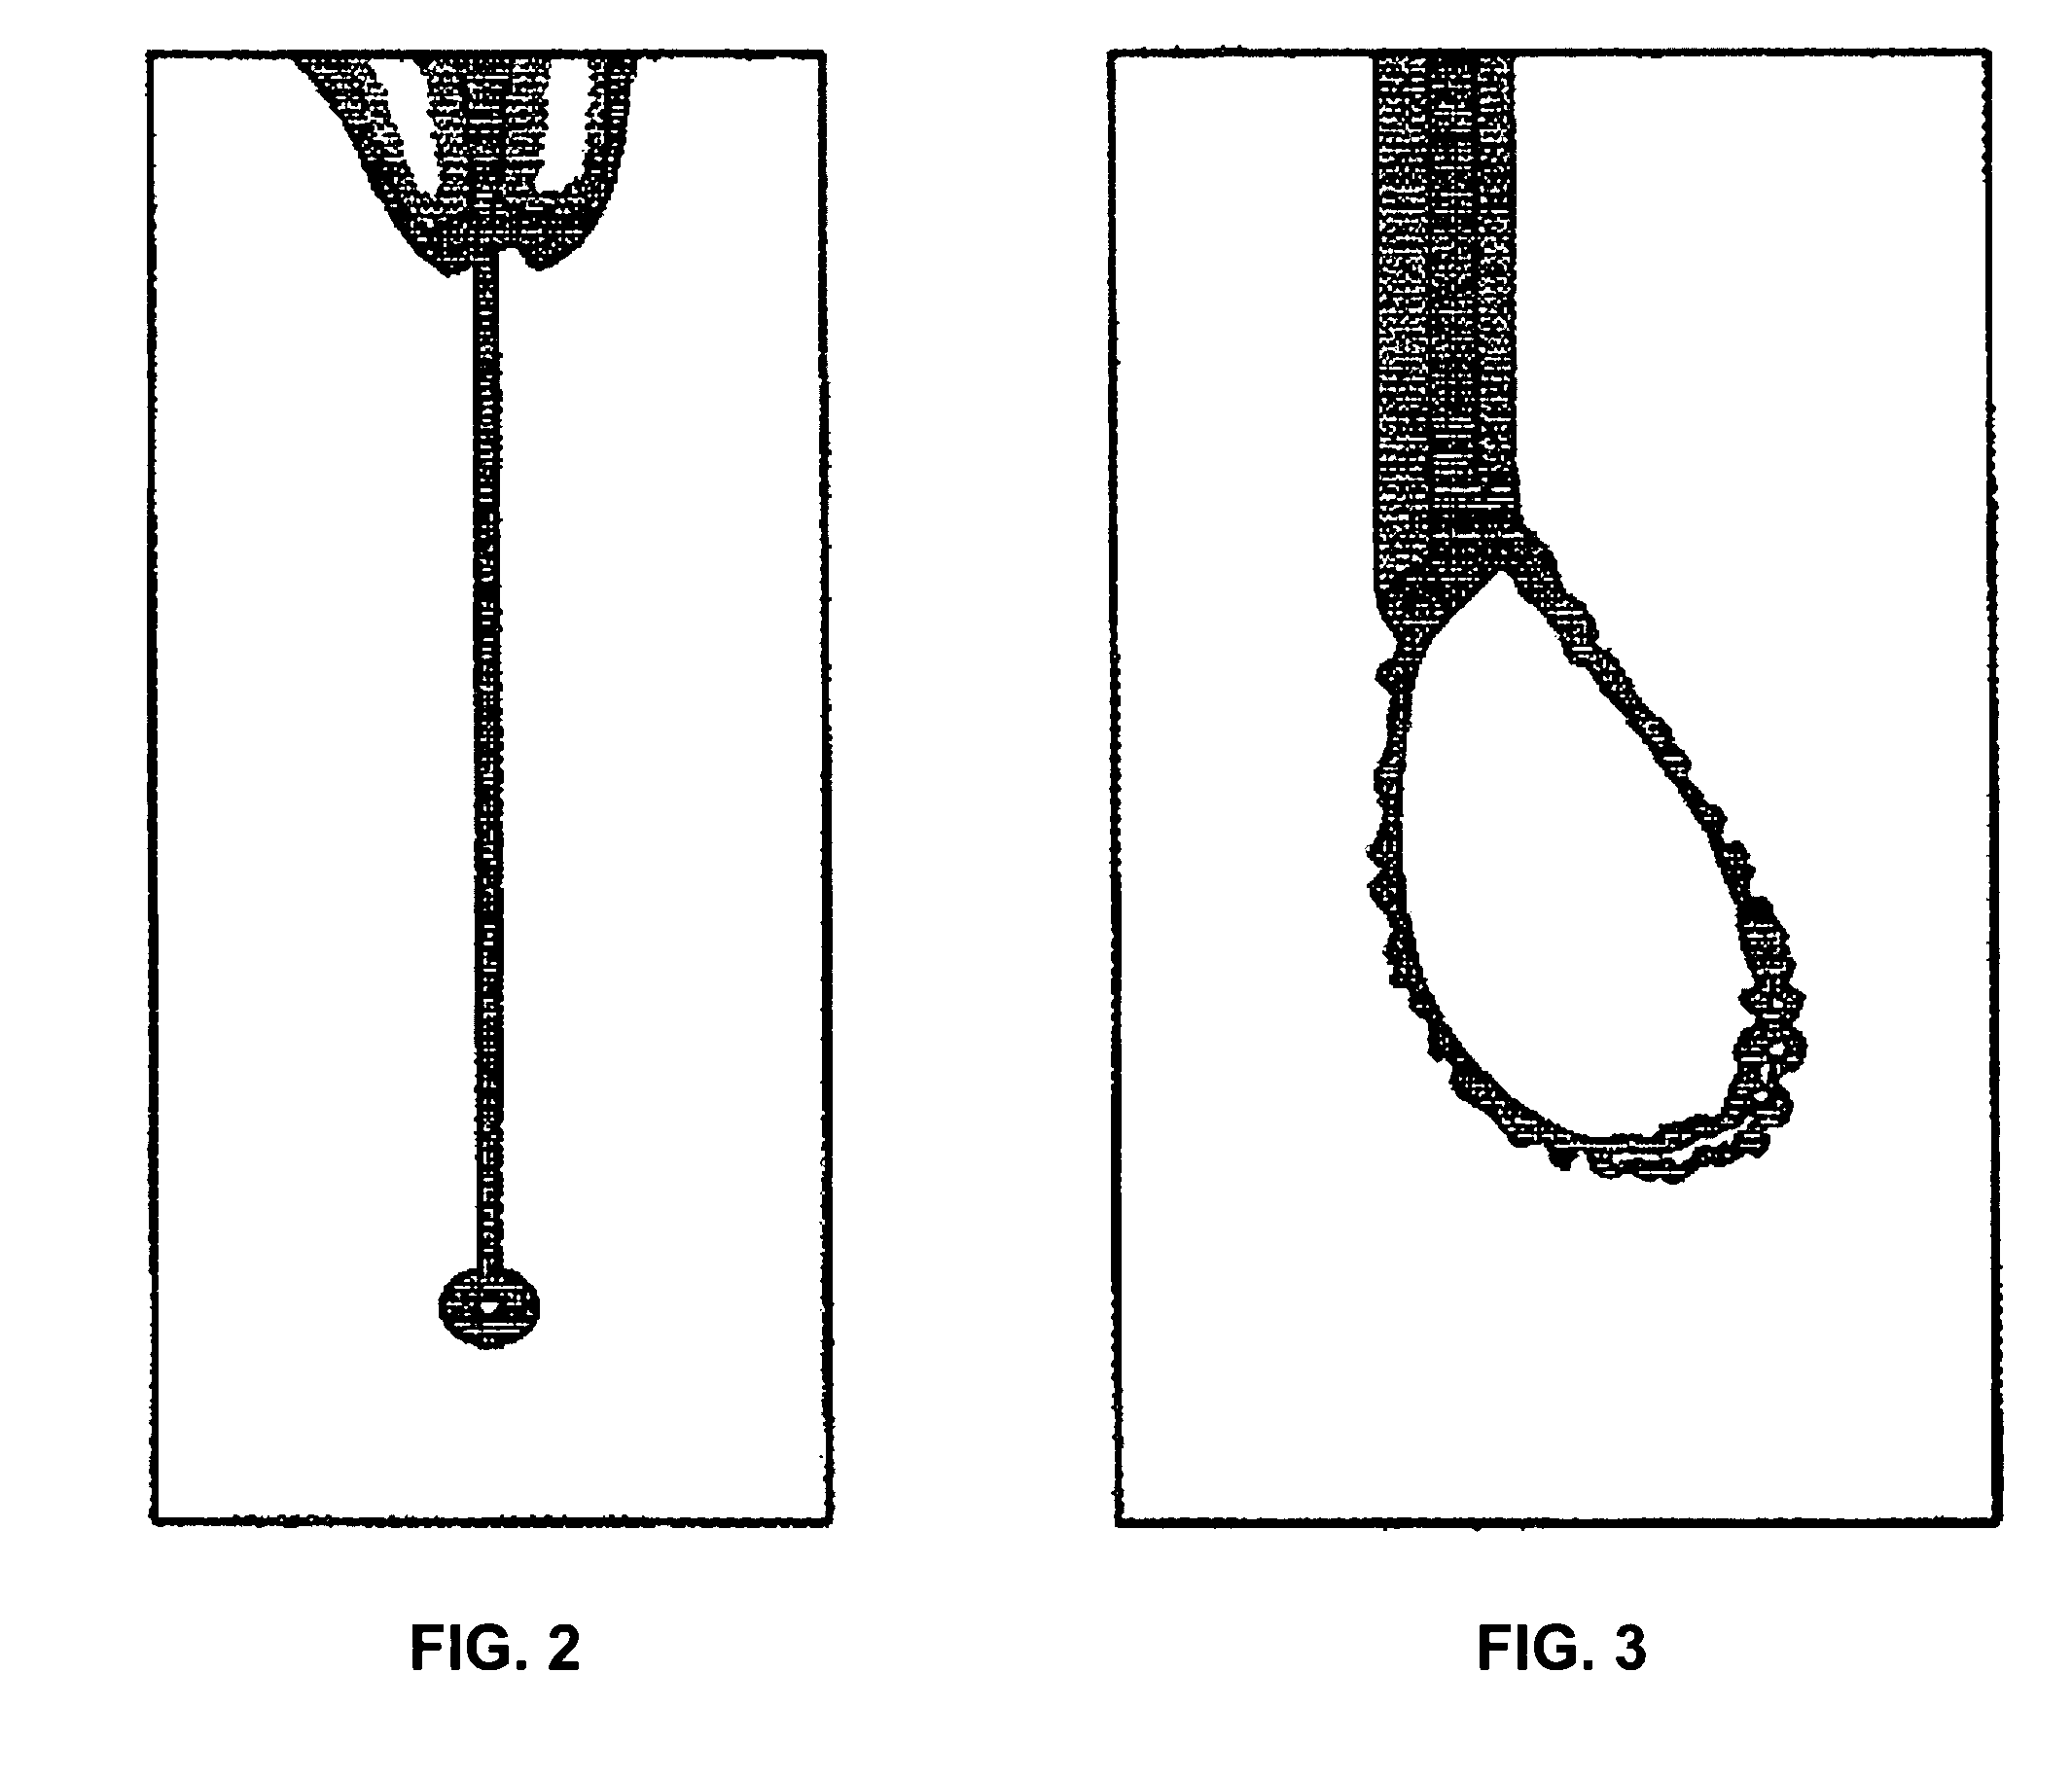 Electrosurgical system with uniformly enhanced electric field and minimal collateral damage